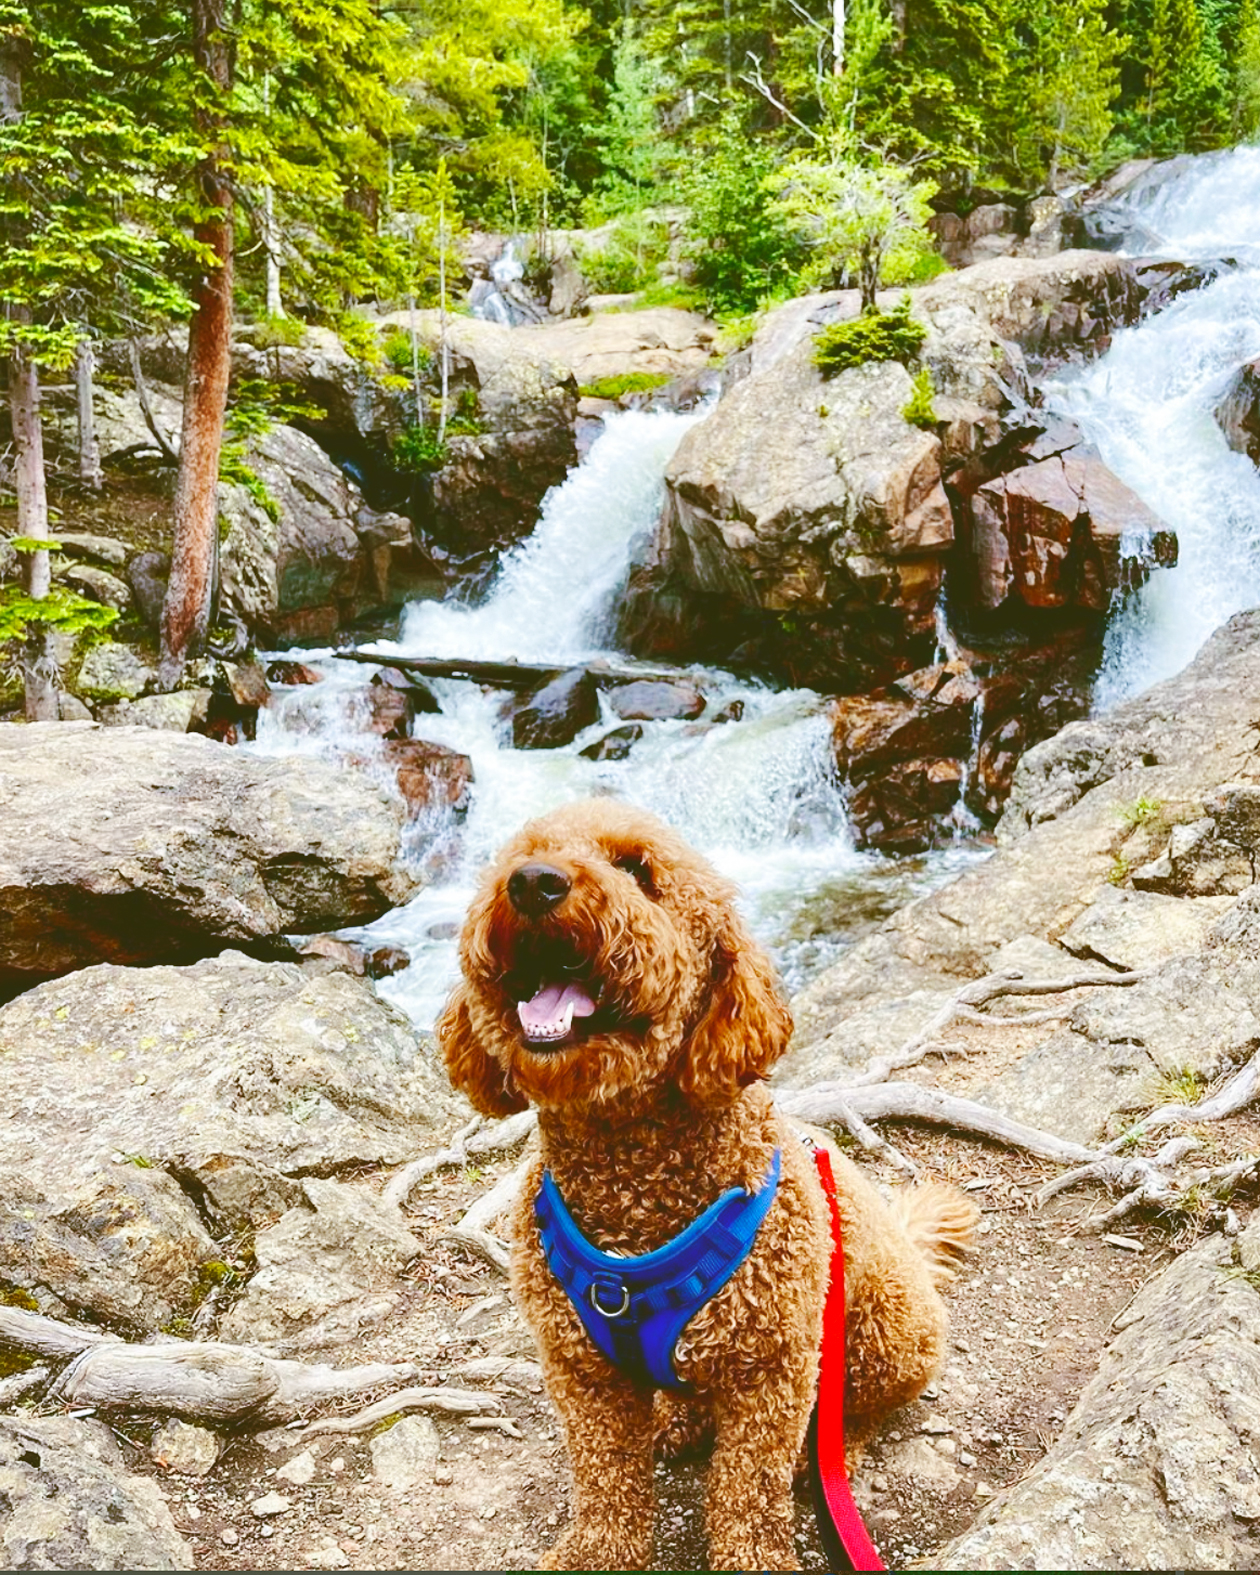 A golden doodle in front of a waterfall wearing a blue harness and red leash